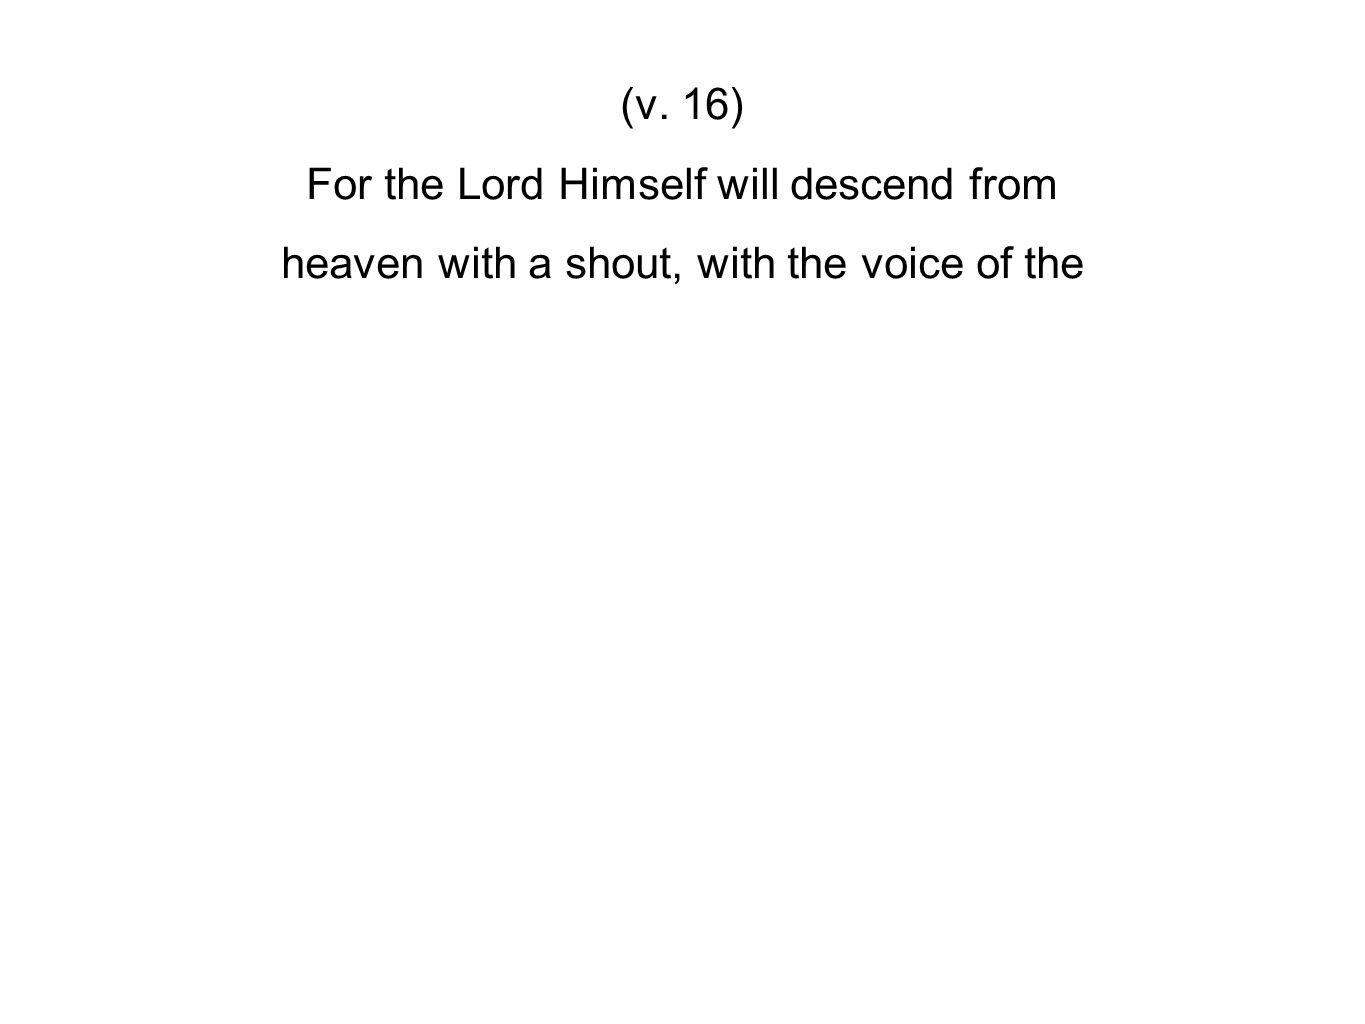 (v. 16) For the Lord Himself will descend from heaven with a shout, with the voice of the